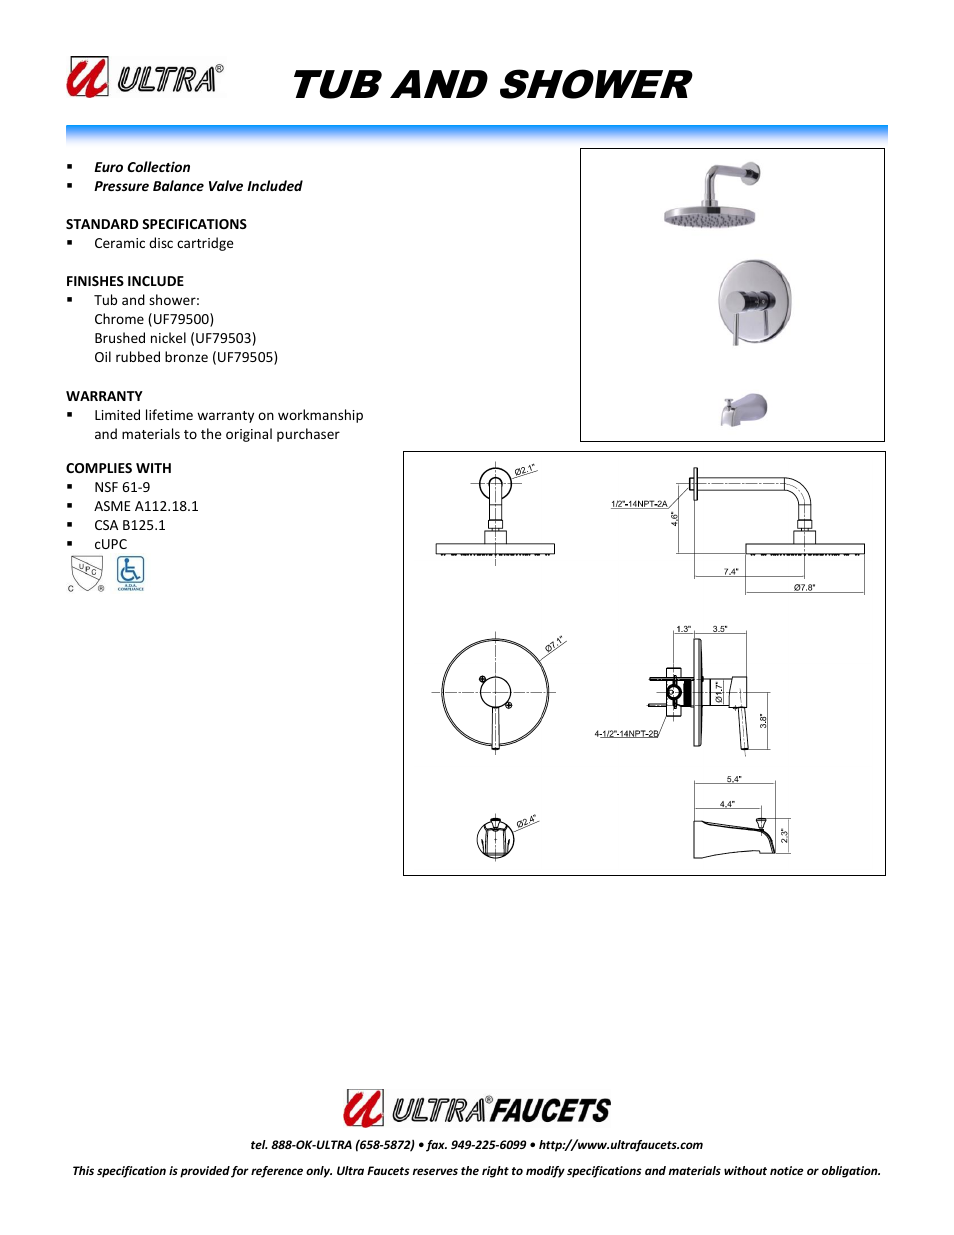 "EURO COLLECTIONSINGLE-HANDLE TUB AND SHOWER FAUCET"